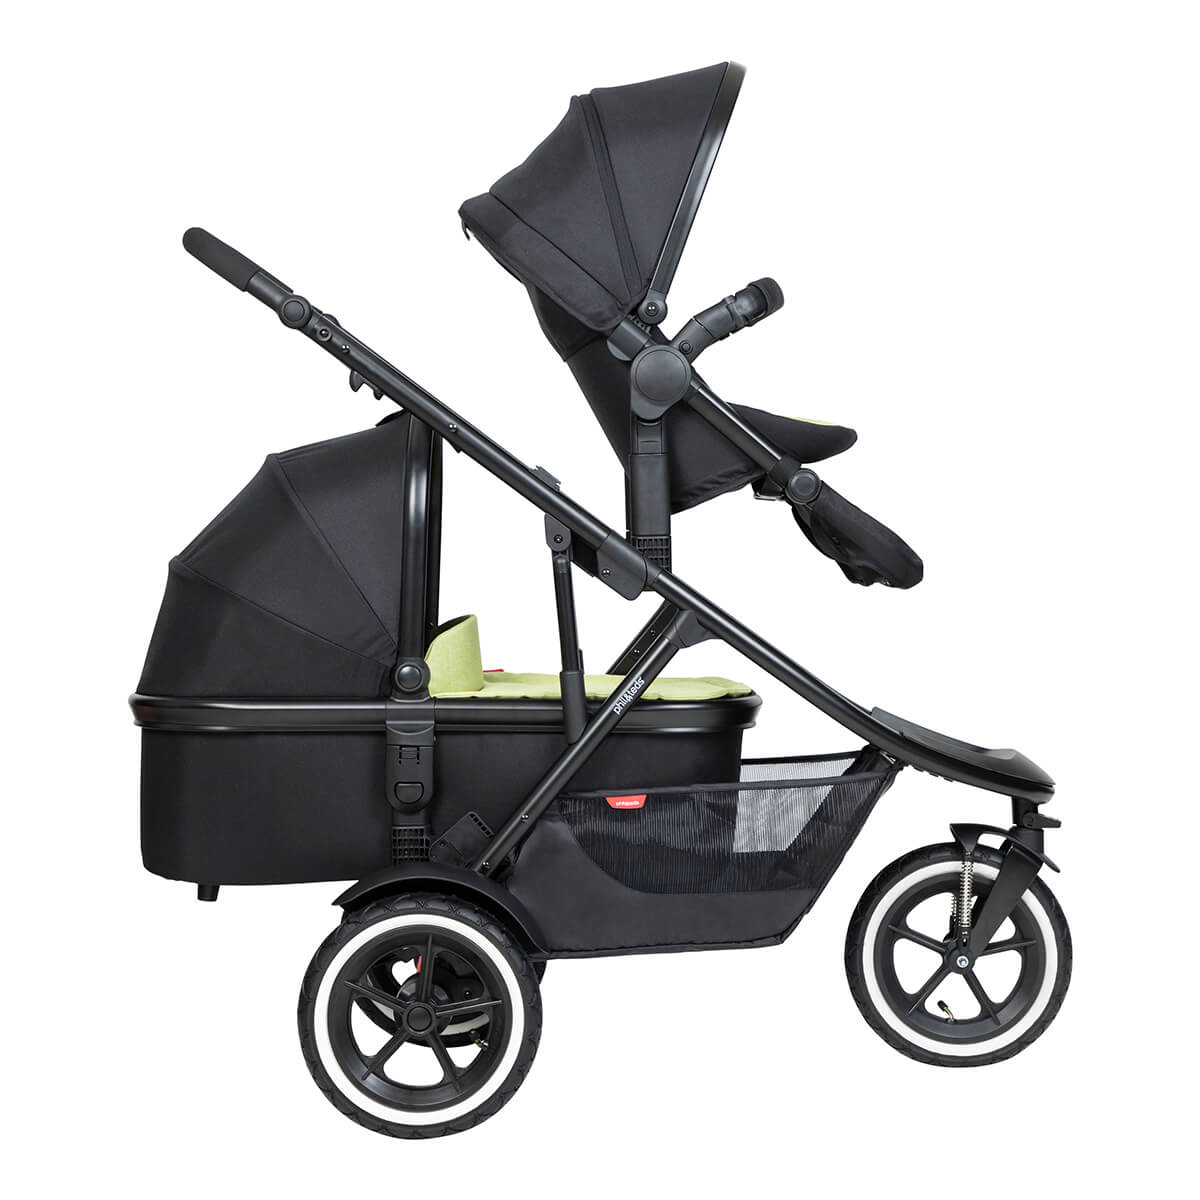 https://cdn.accentuate.io/4546157248617/19119322726505/philteds-sport-buggy-with-double-kit-extended-clip-and-snug-carrycot-side-view-v1626484907443.jpg?1200x1200